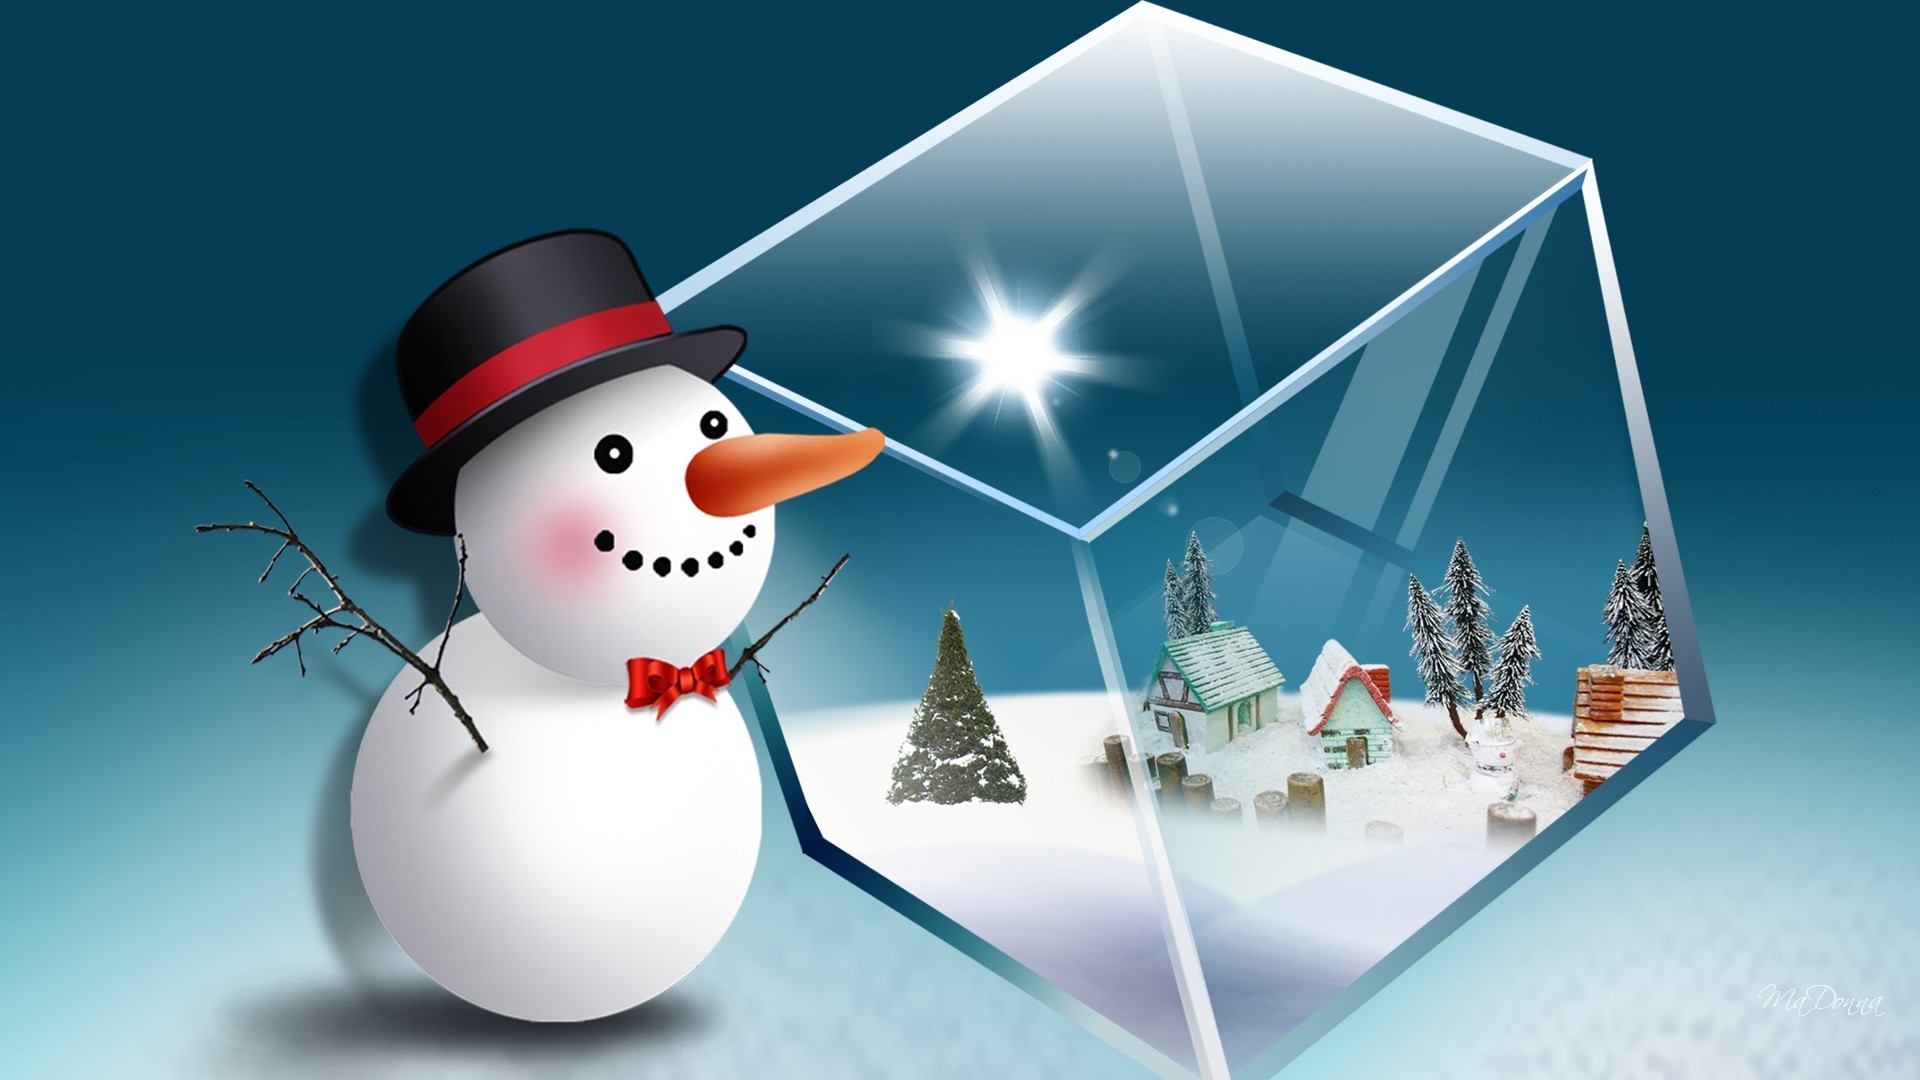 1920x1080 ... Snow Globe Live Wallpaper - Android Apps on Google Play ...